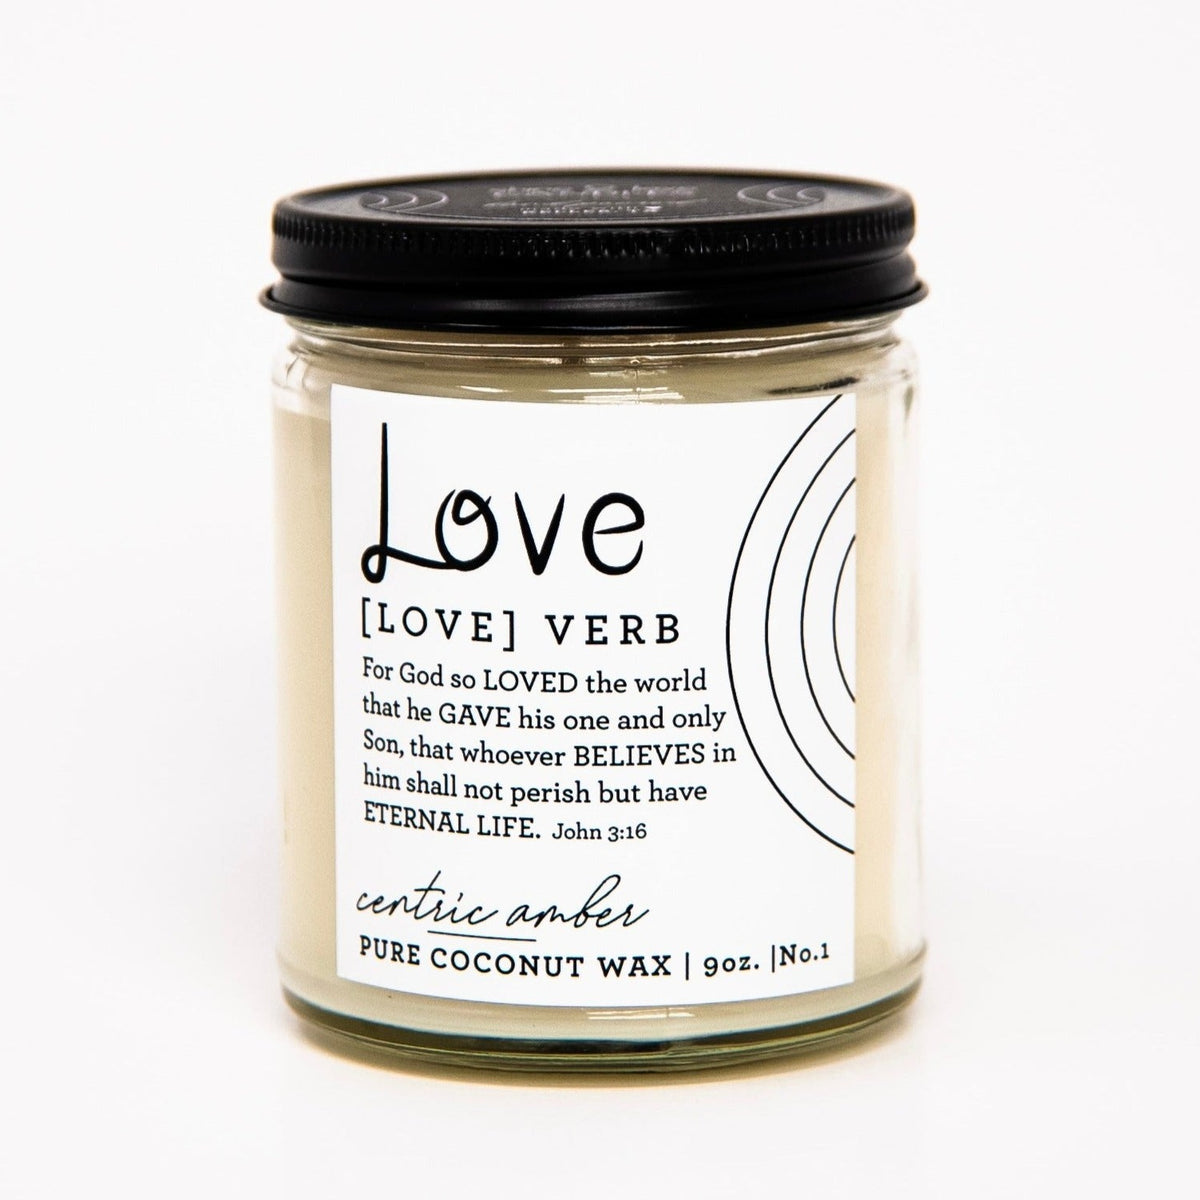 LOVE CANDLE + CENTRIC AMBER